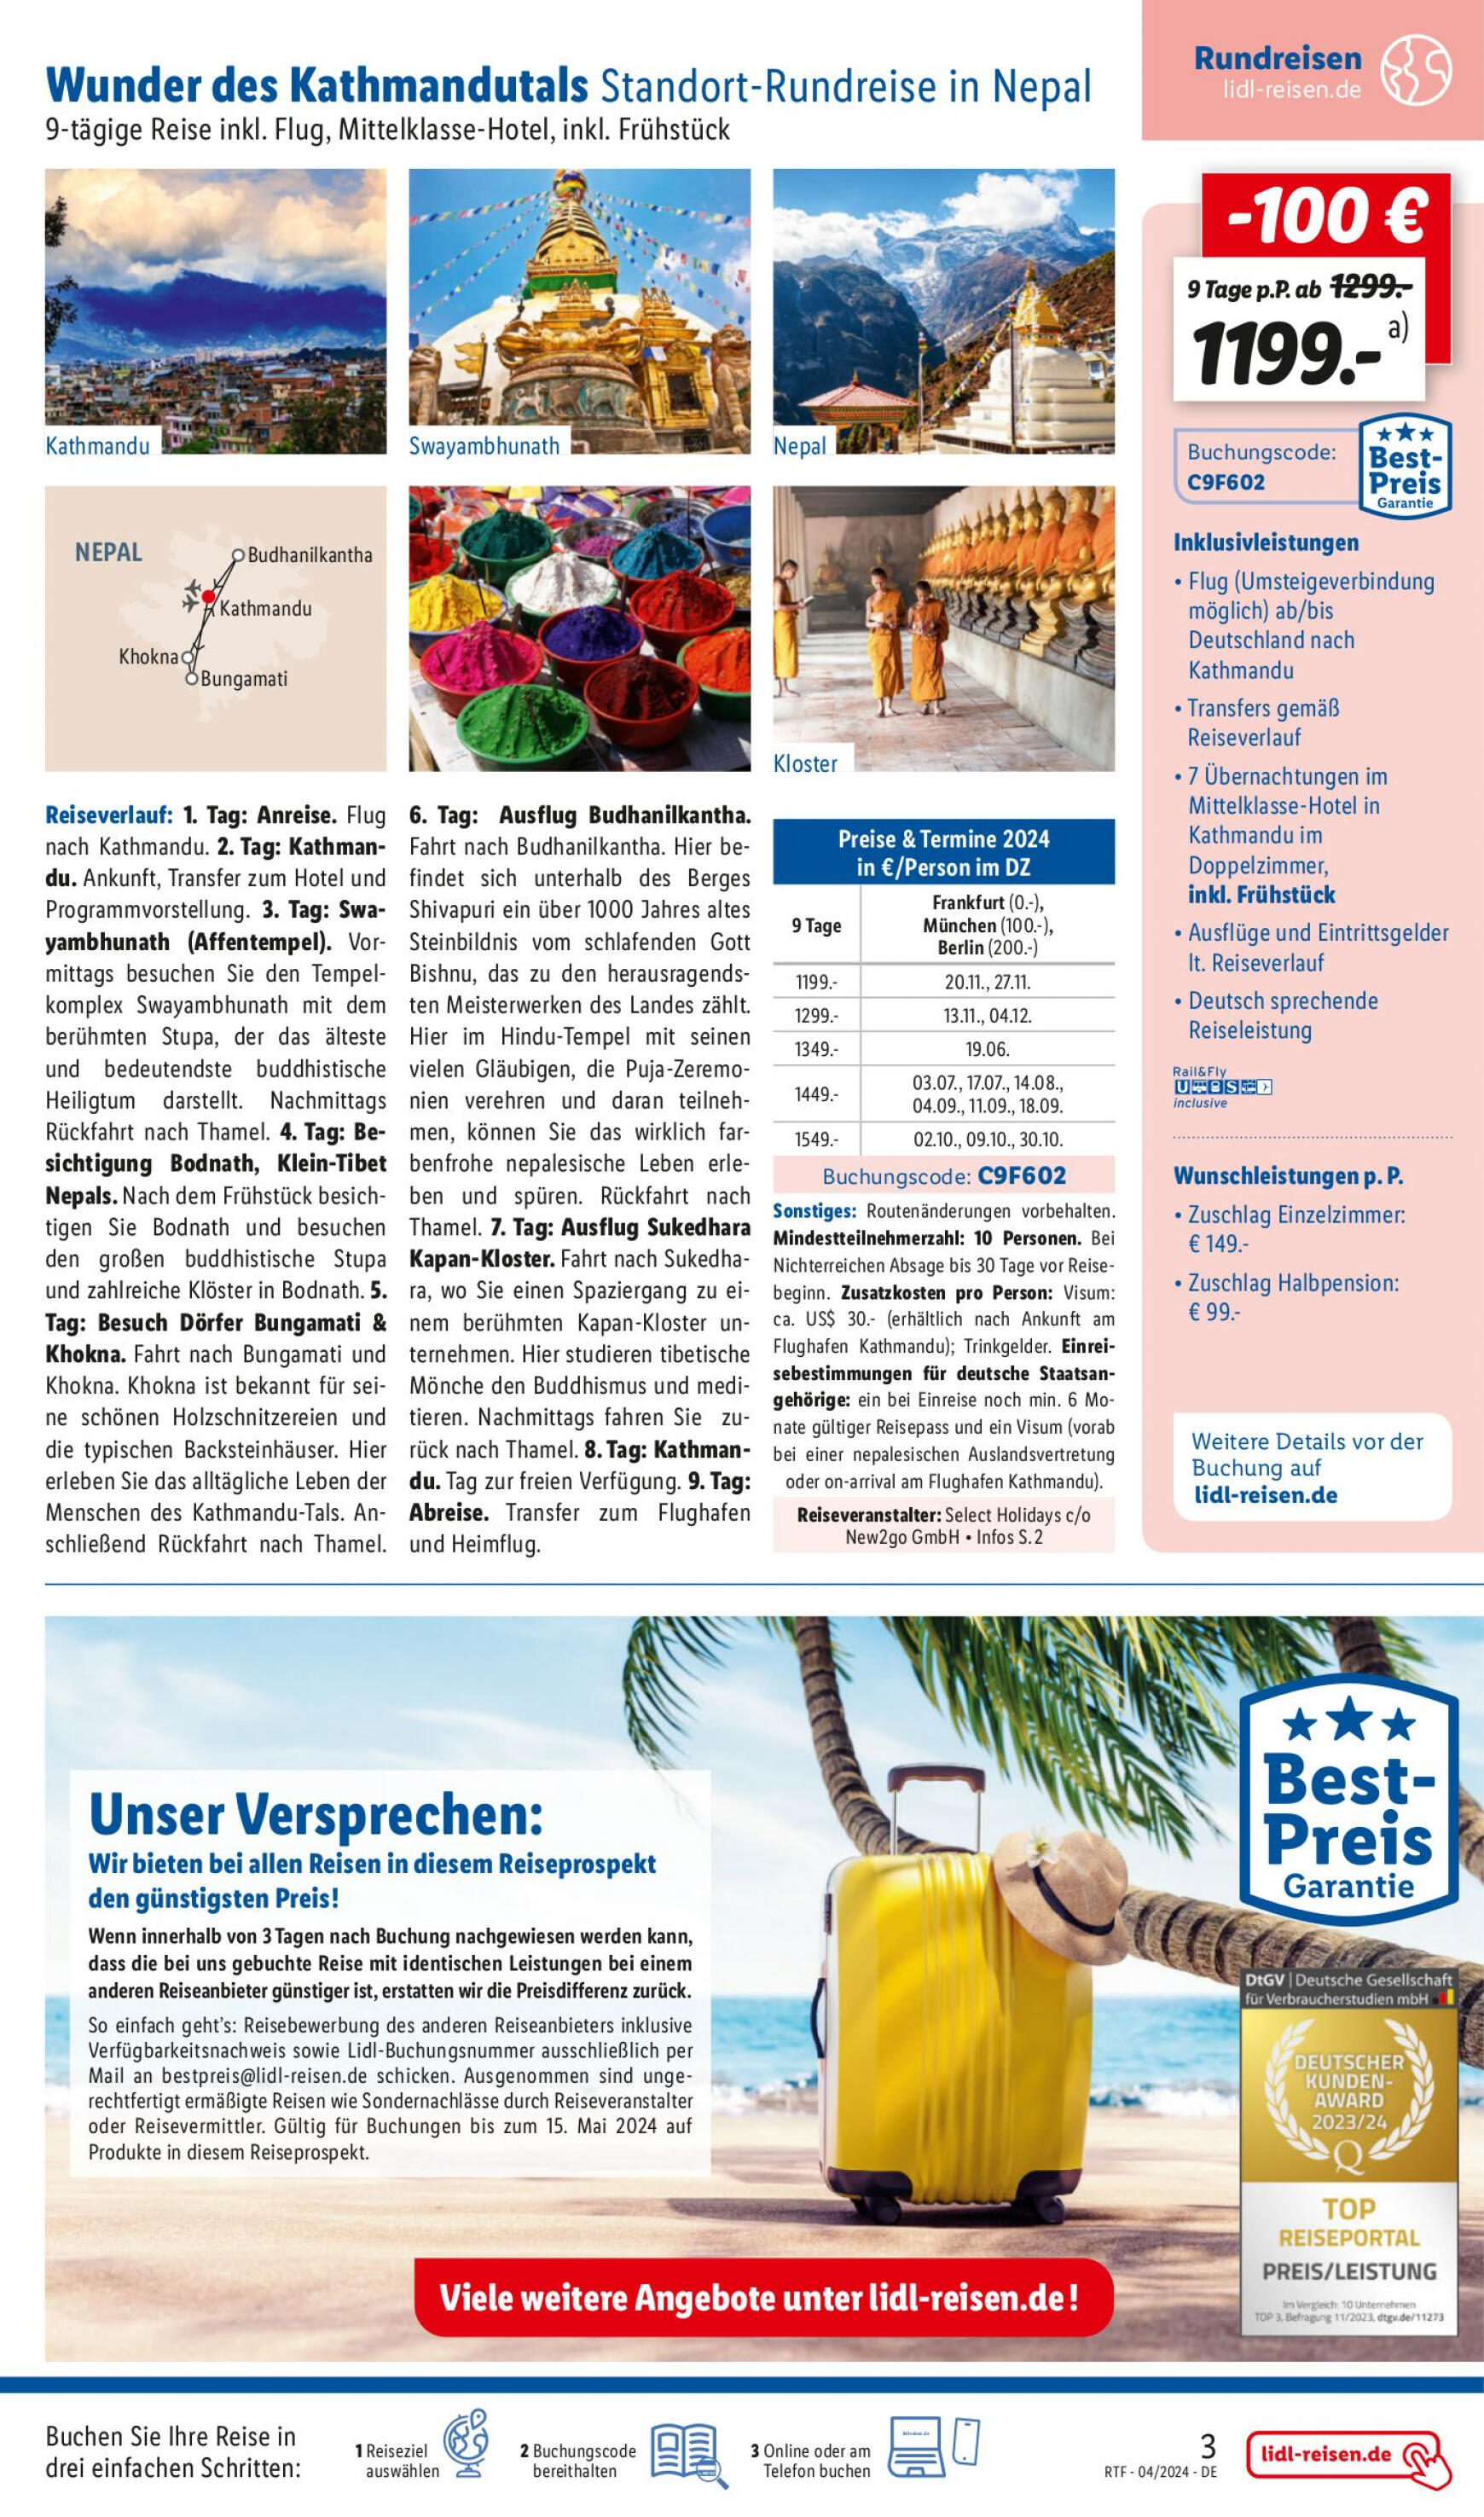 lidl - Flyer Lidl - Sommerschnäppchen aktuell 13.04. - 15.05. - page: 3